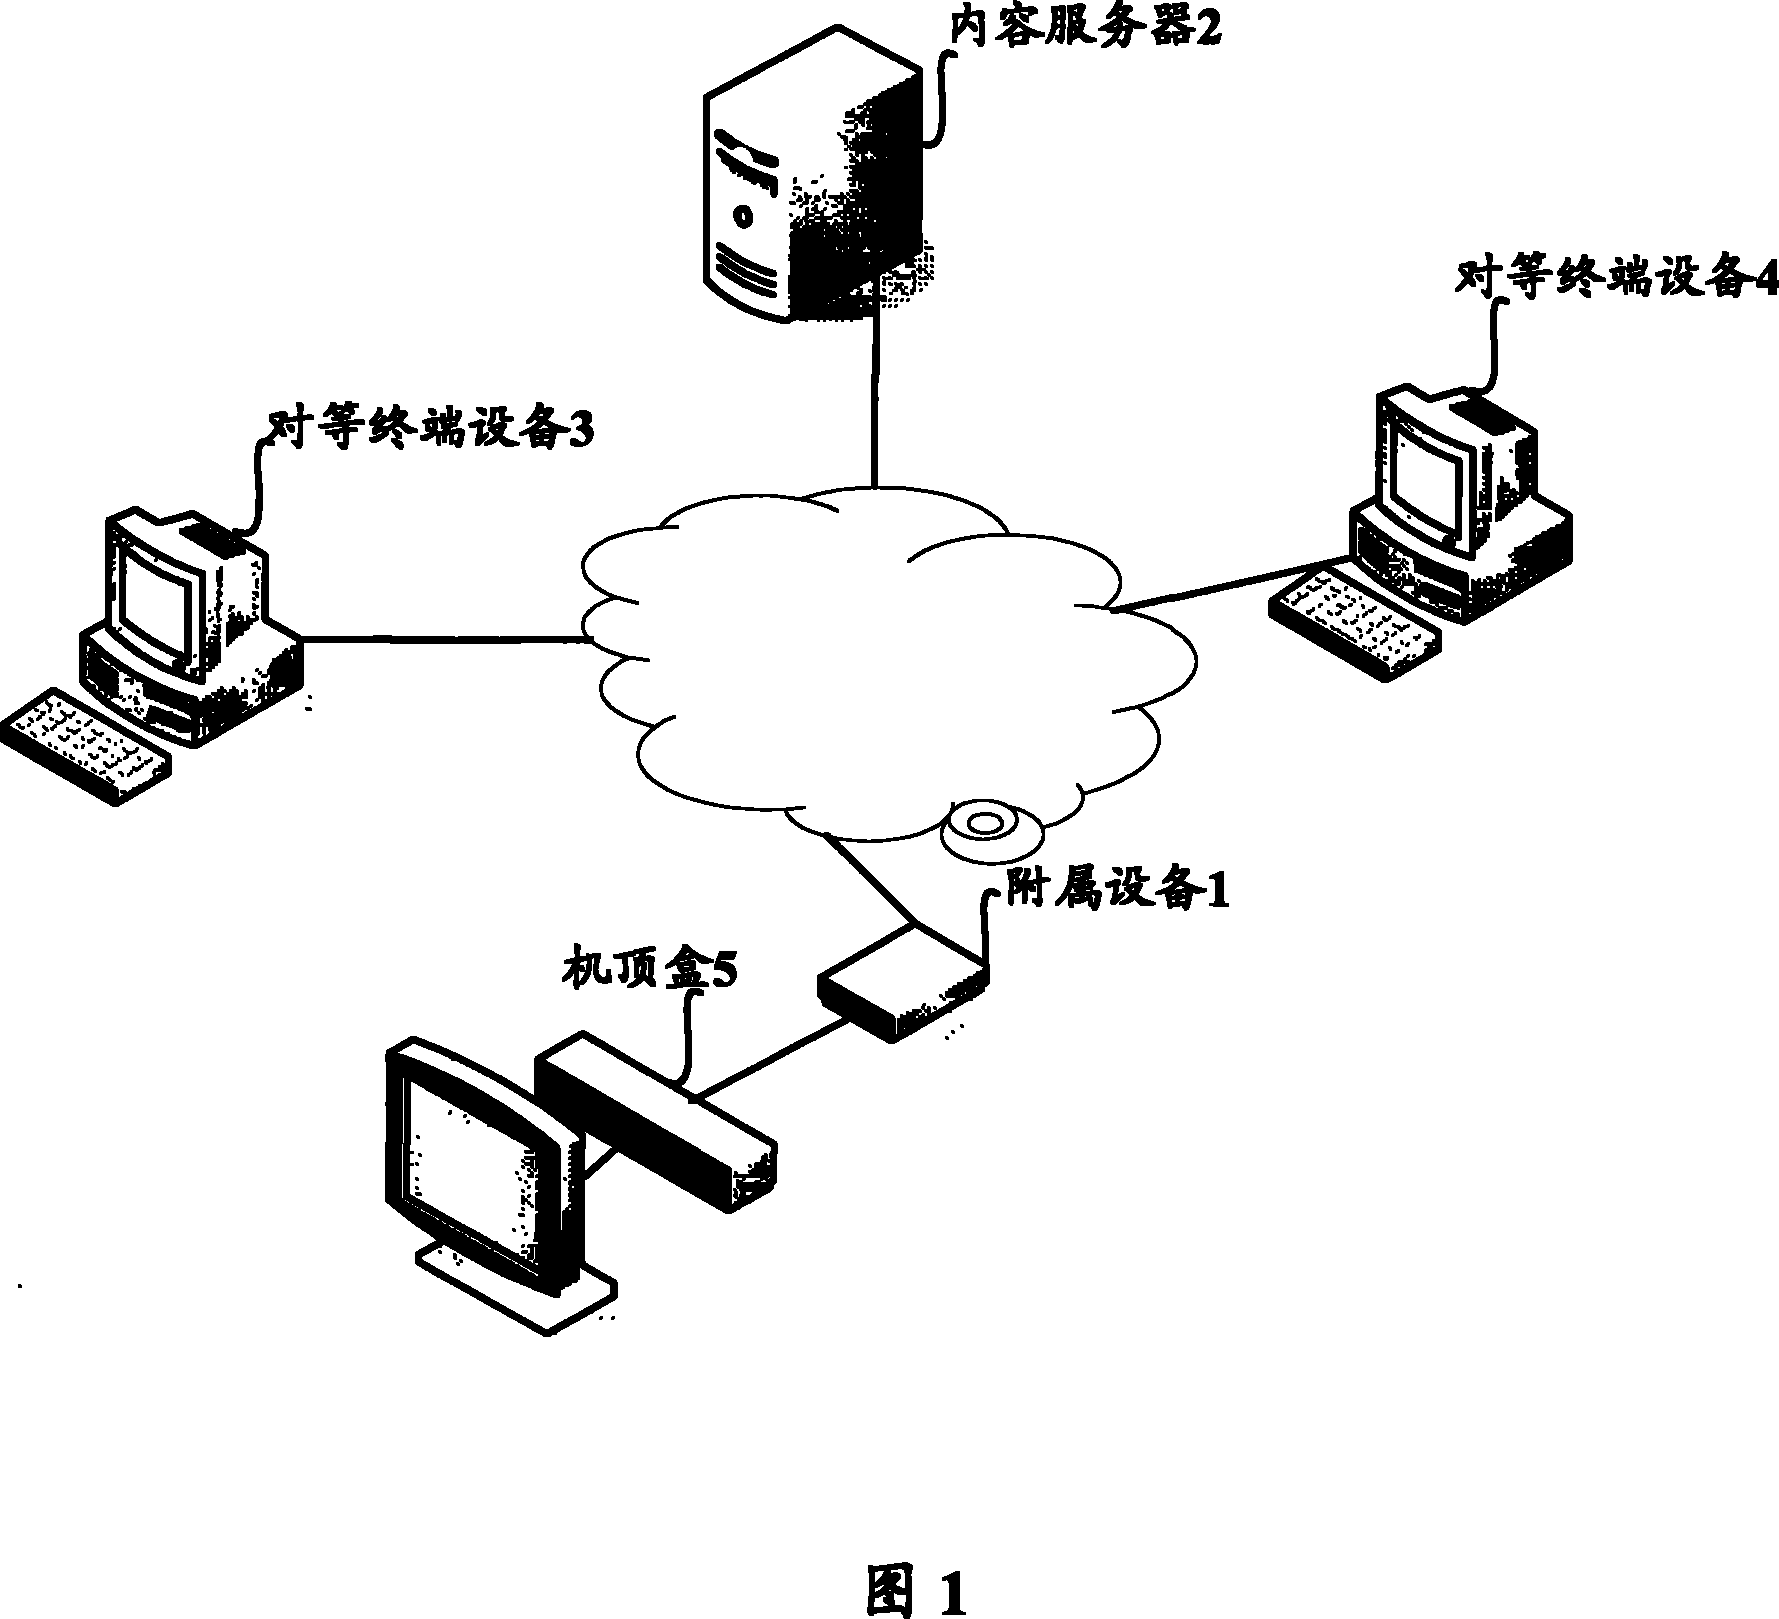 Method and apparatus for providing data to network appliance in auxiliary appliance of network appliance